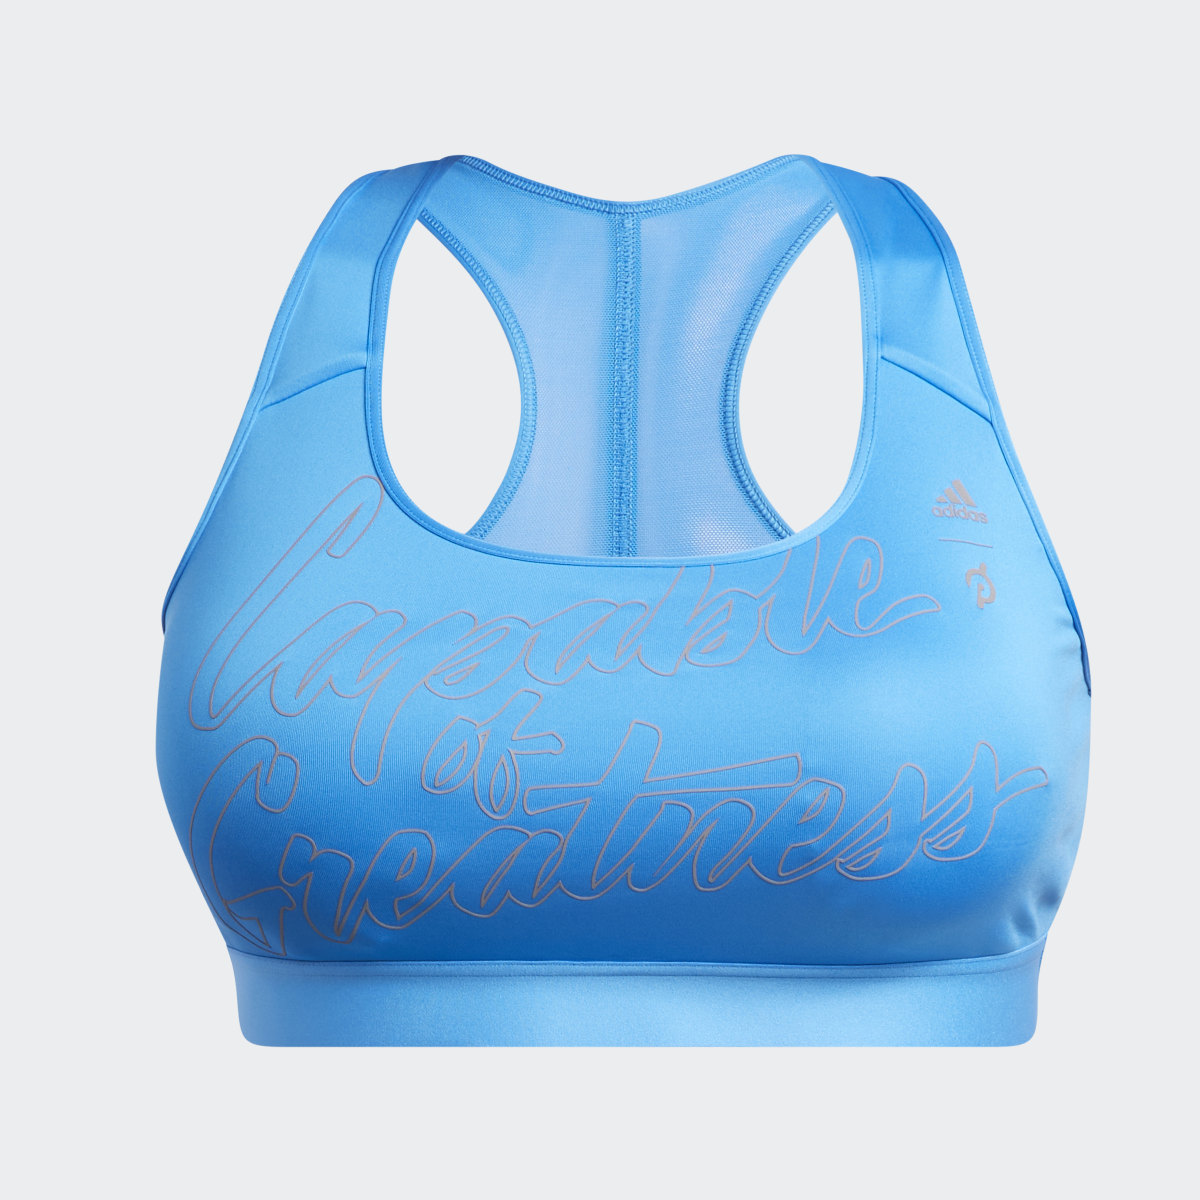 Adidas Capable of Greatness Bra (Plus Size). 5